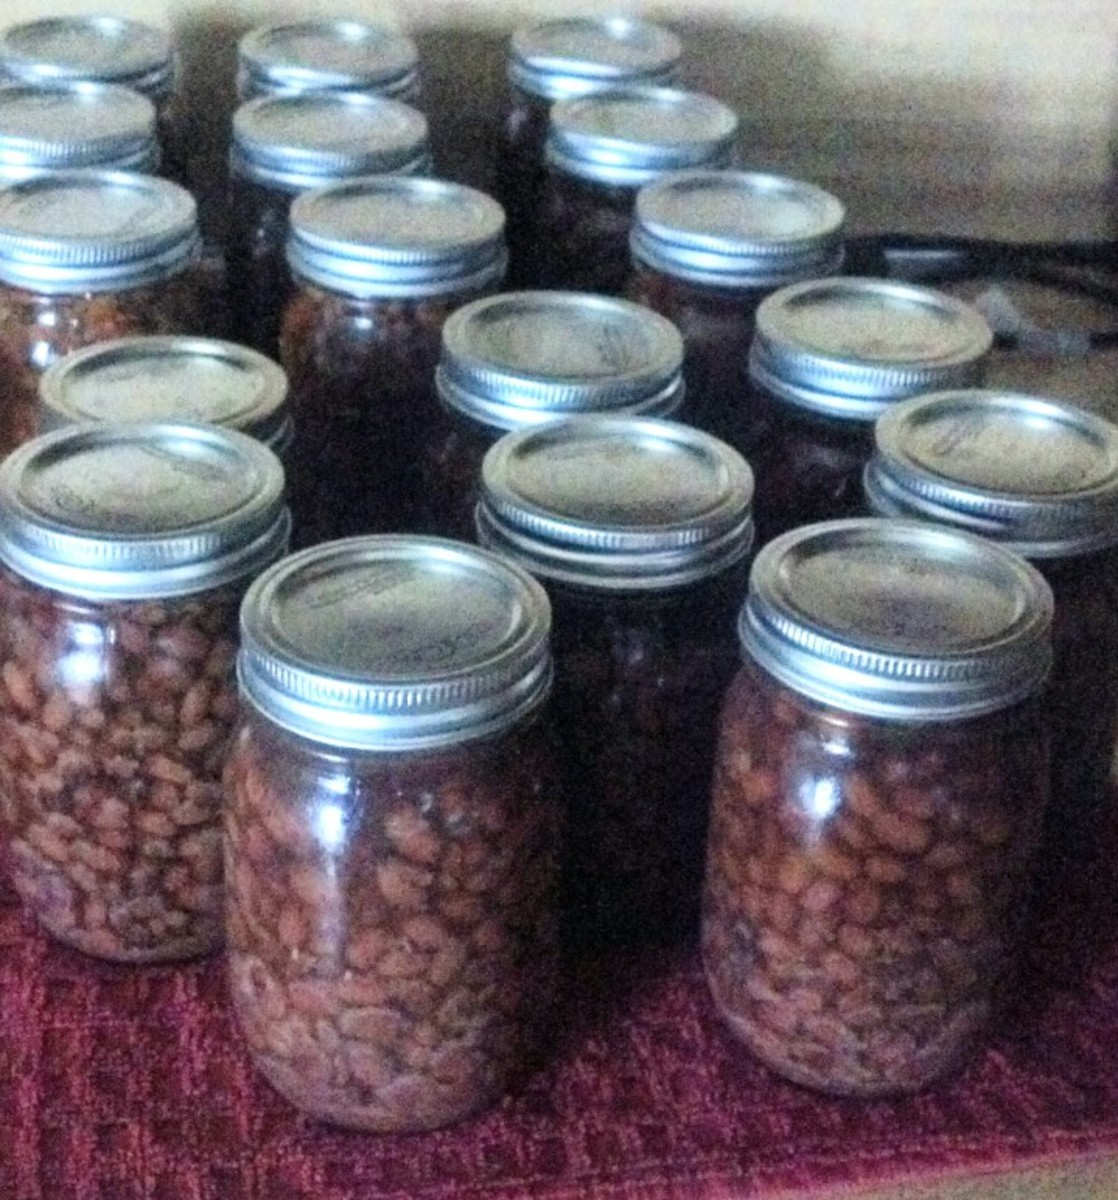 Black beans canned and ready for making black bean and corn salsa (among other things) next summer. 